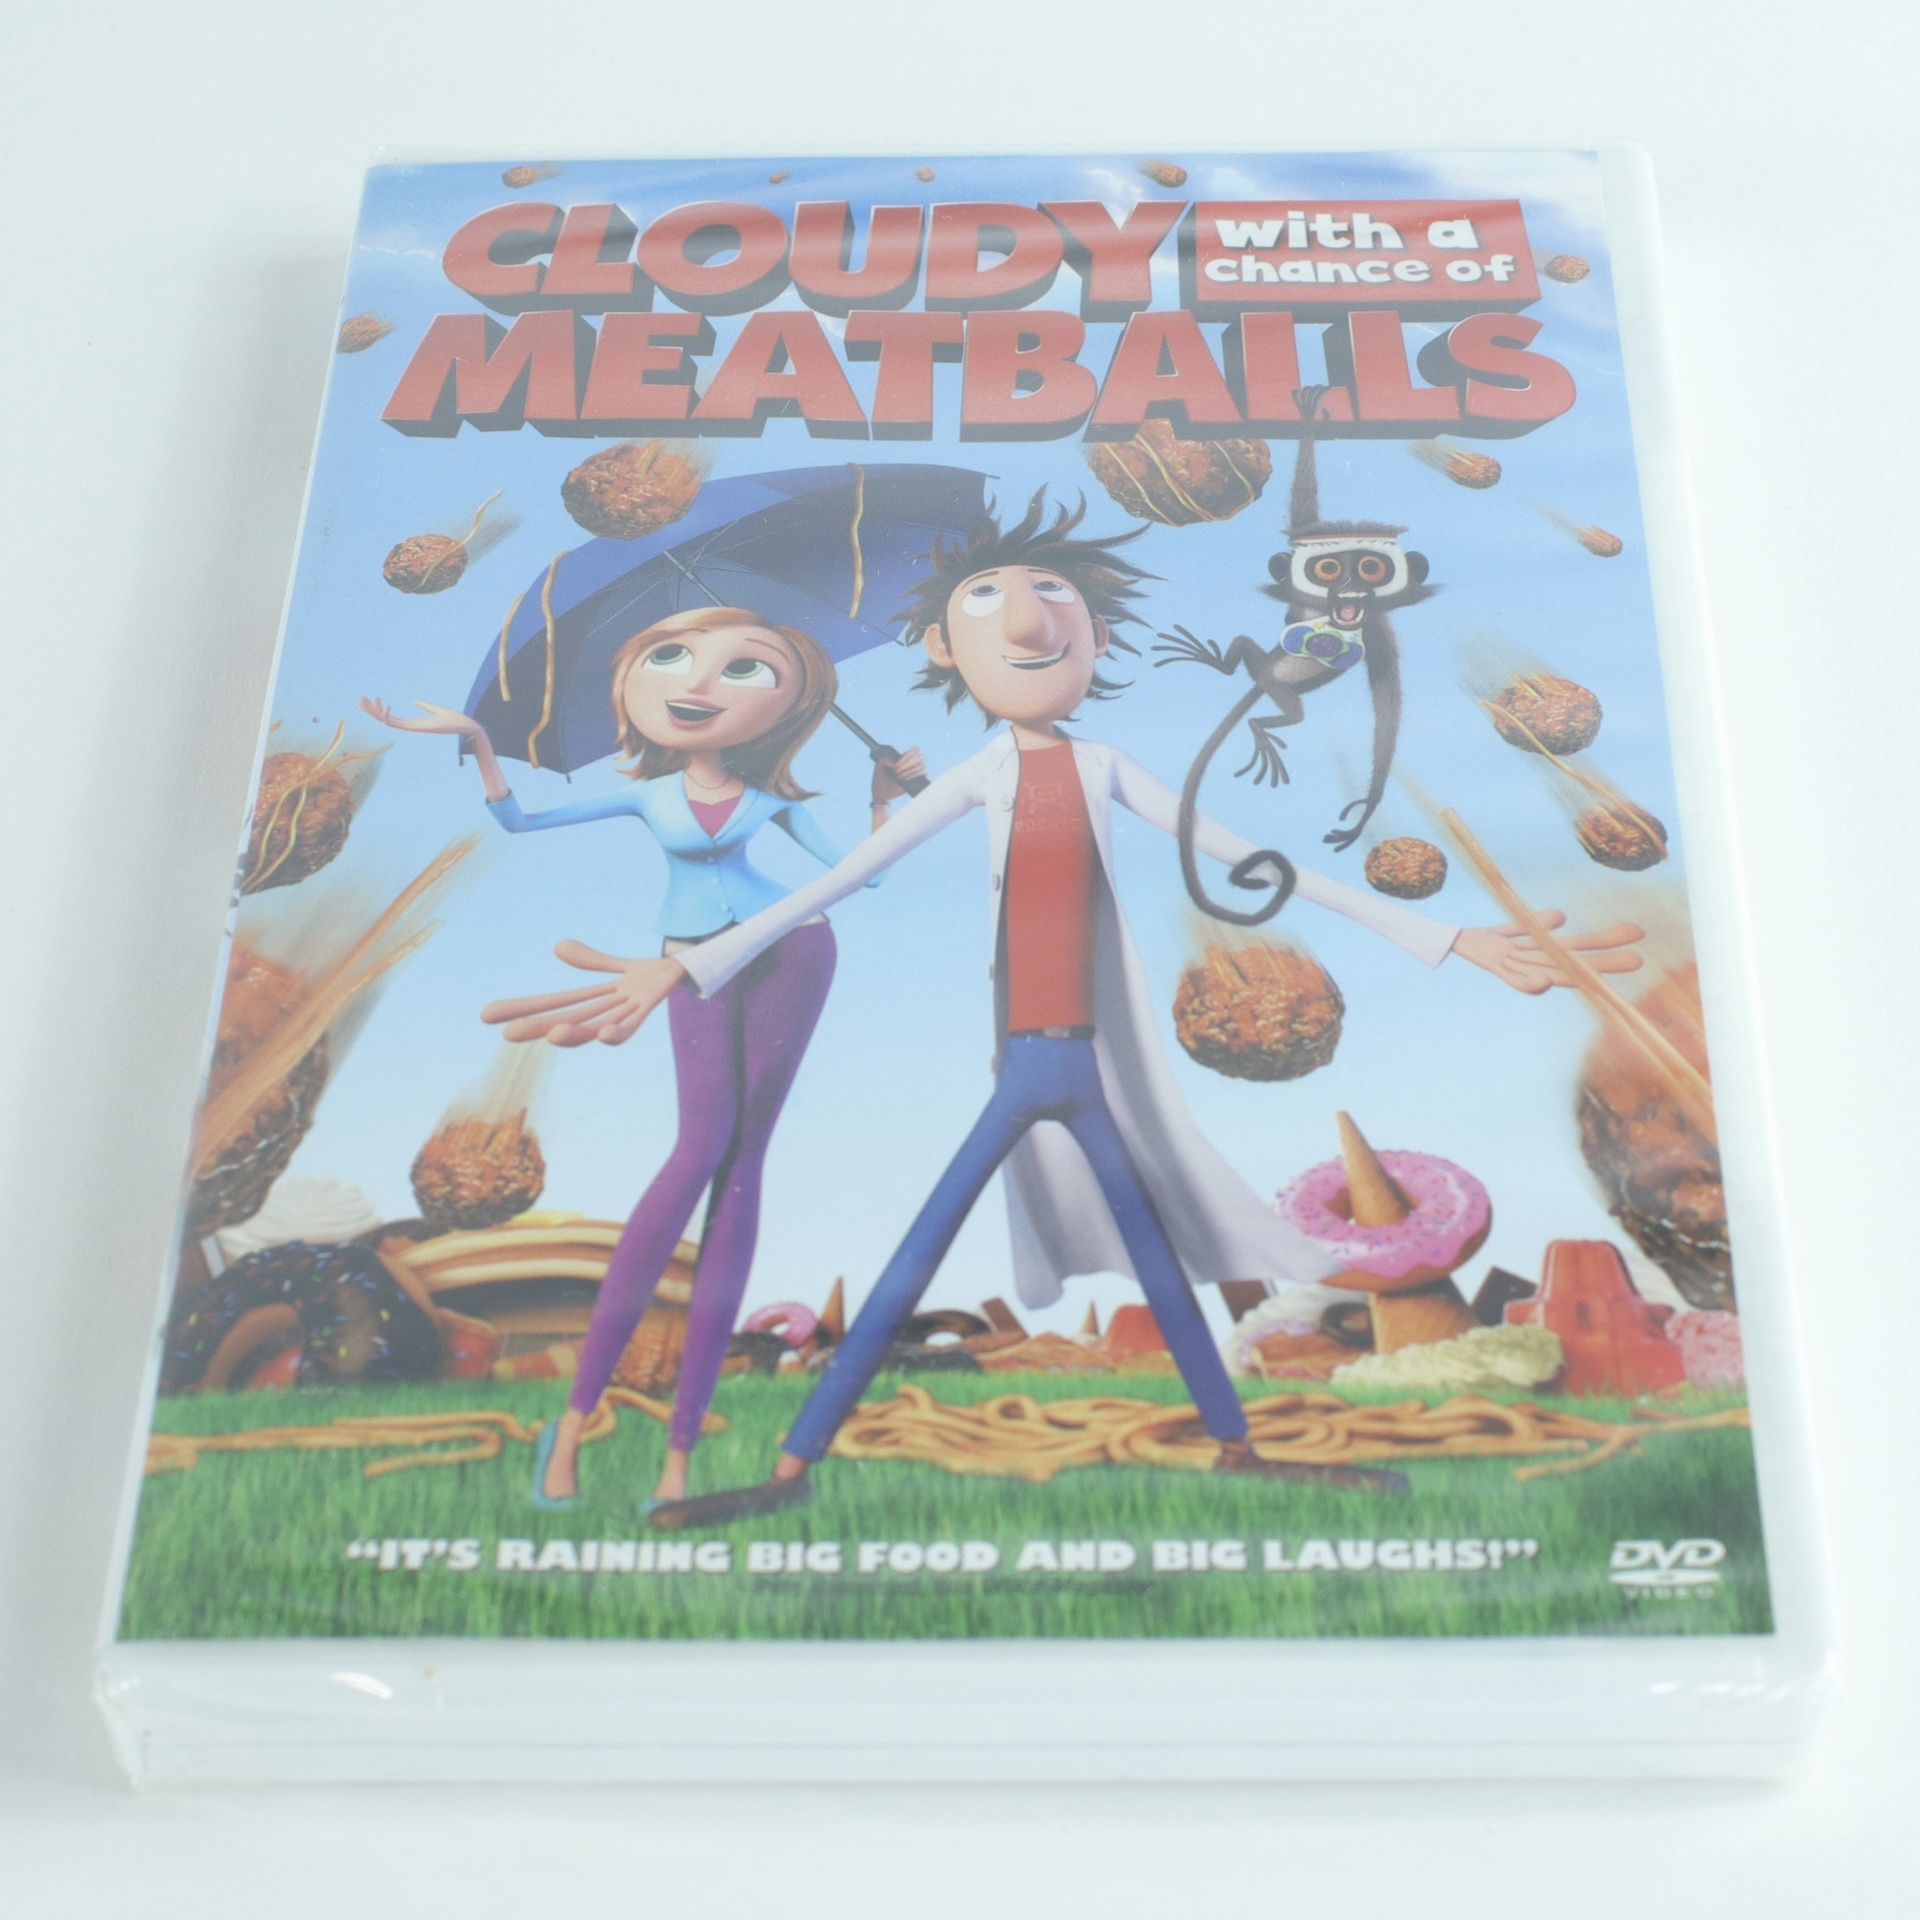 Cloudy with a Chance of Meatballs DVD Movie - NEW